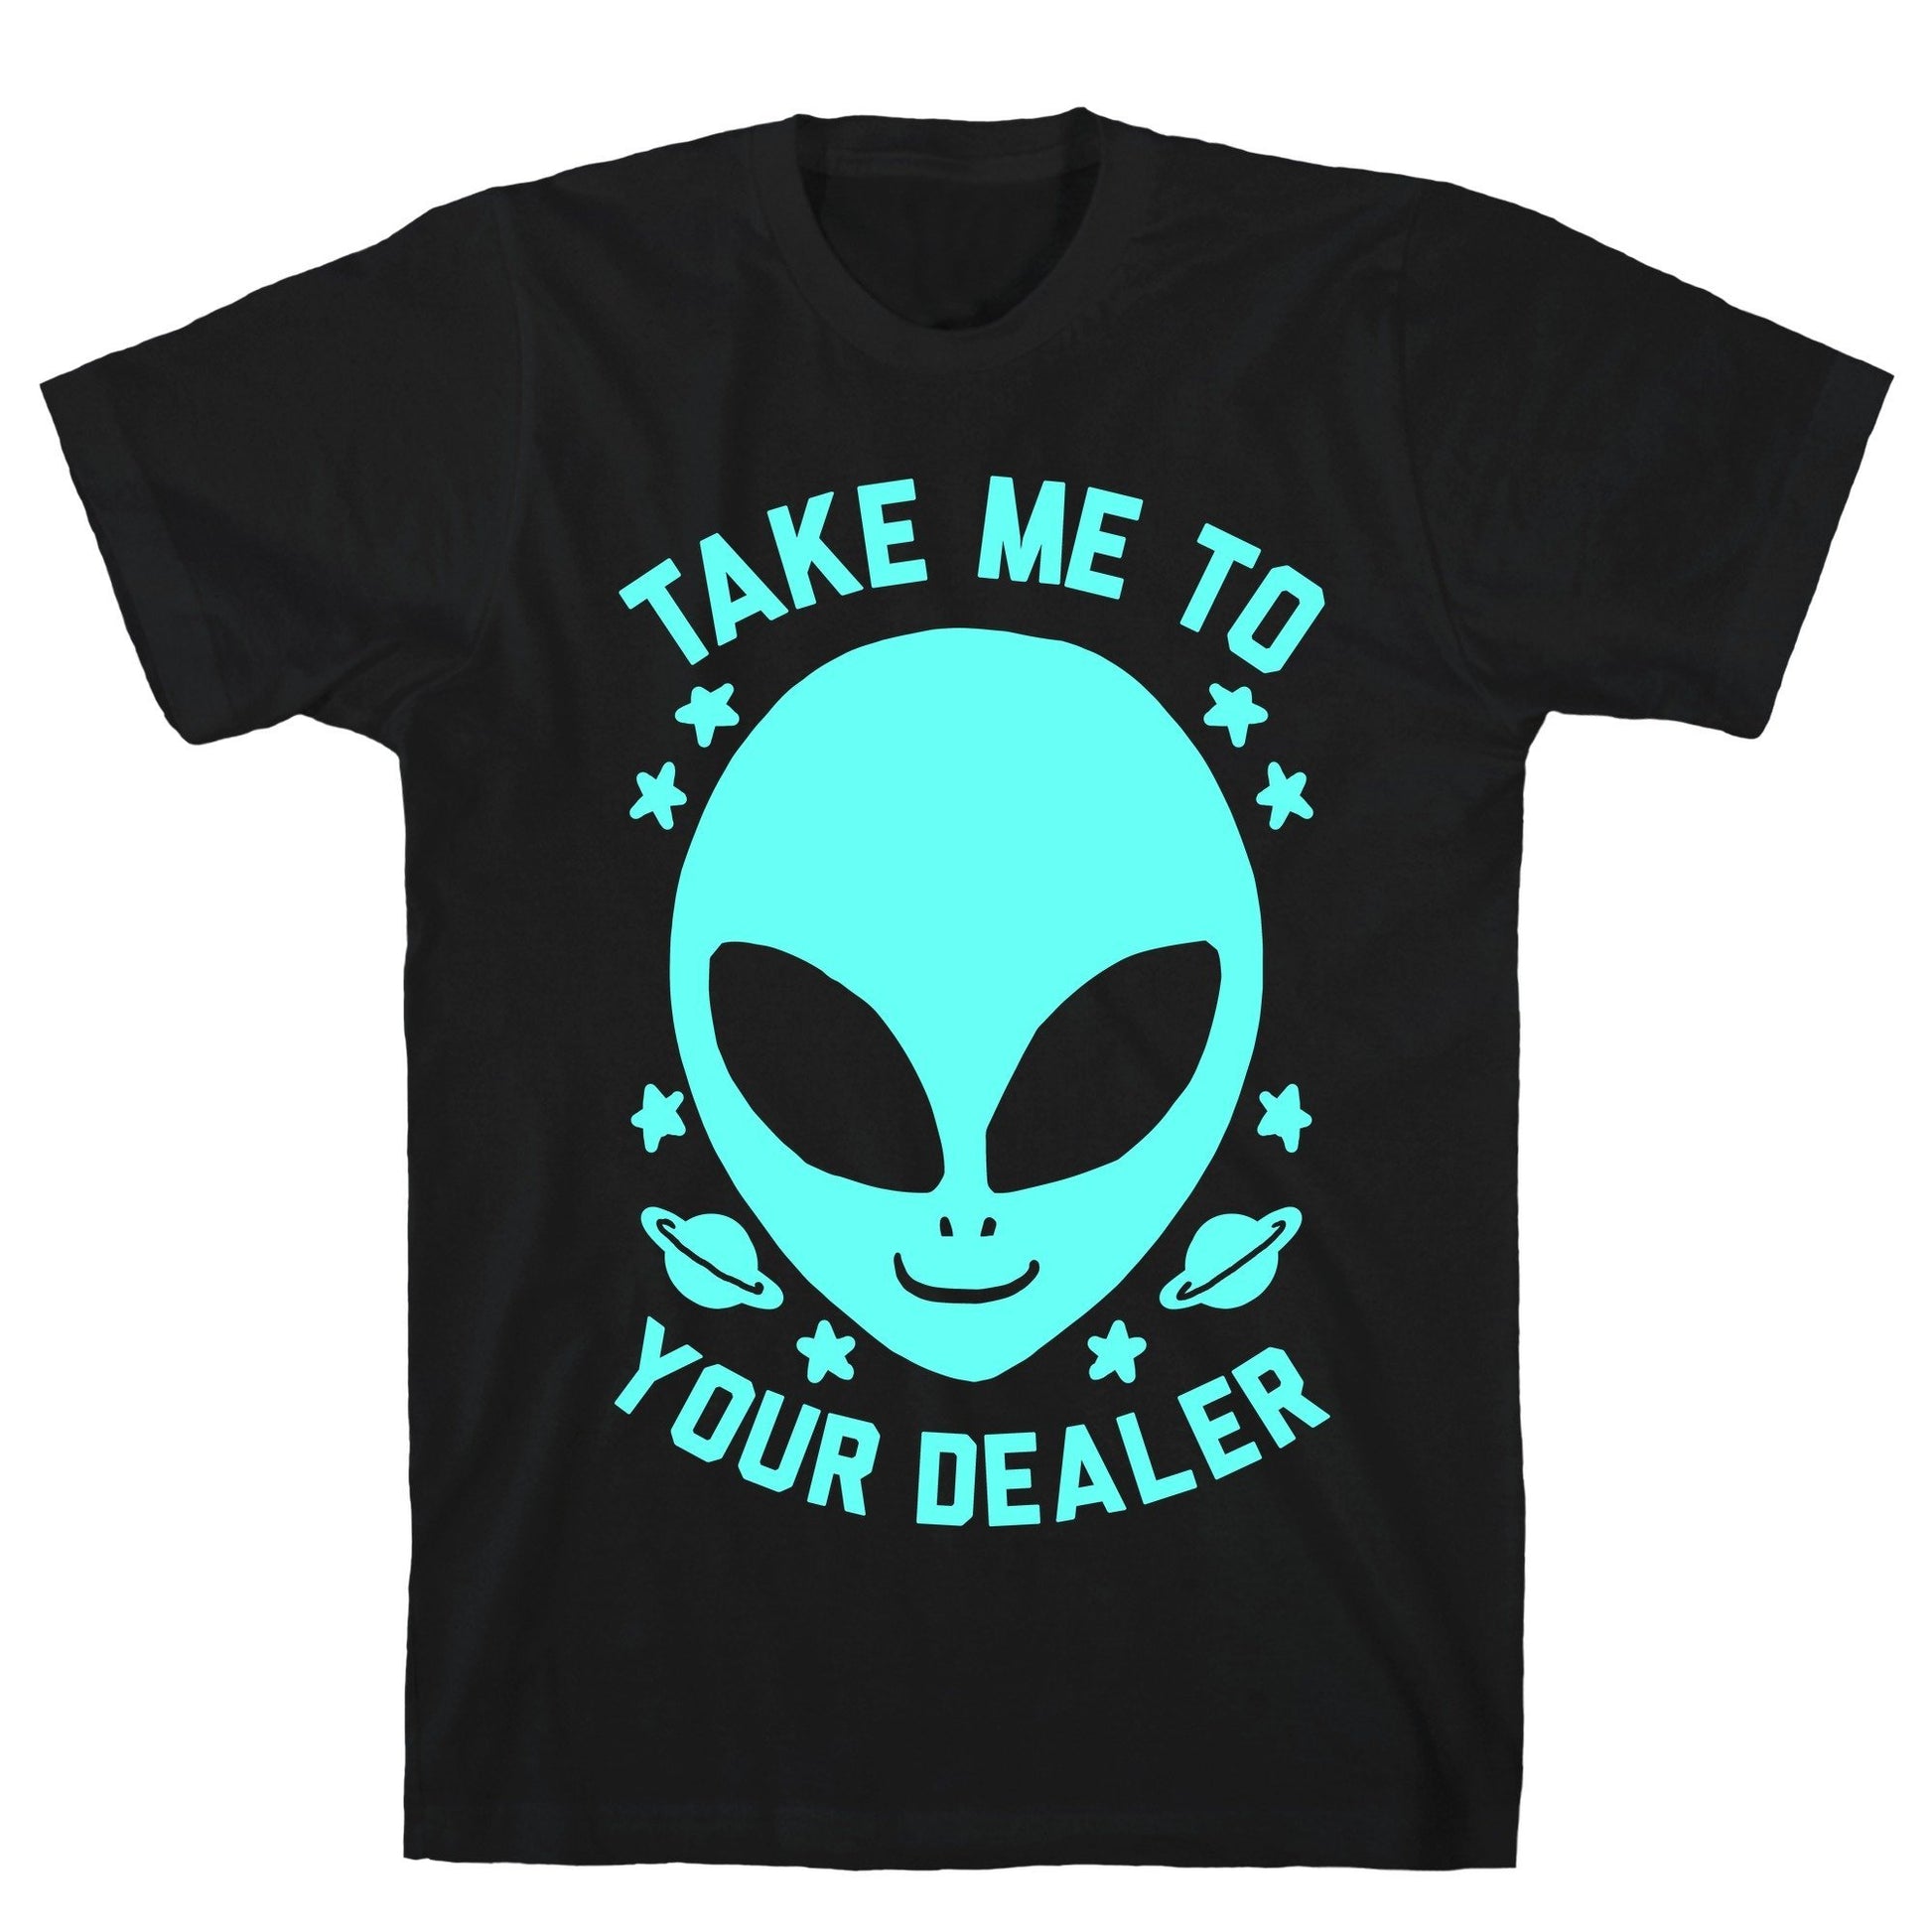 Take Me To Your Dealer Black Unisex Cotton Tee by LookHUMAN Flower Power Packages Black Large 